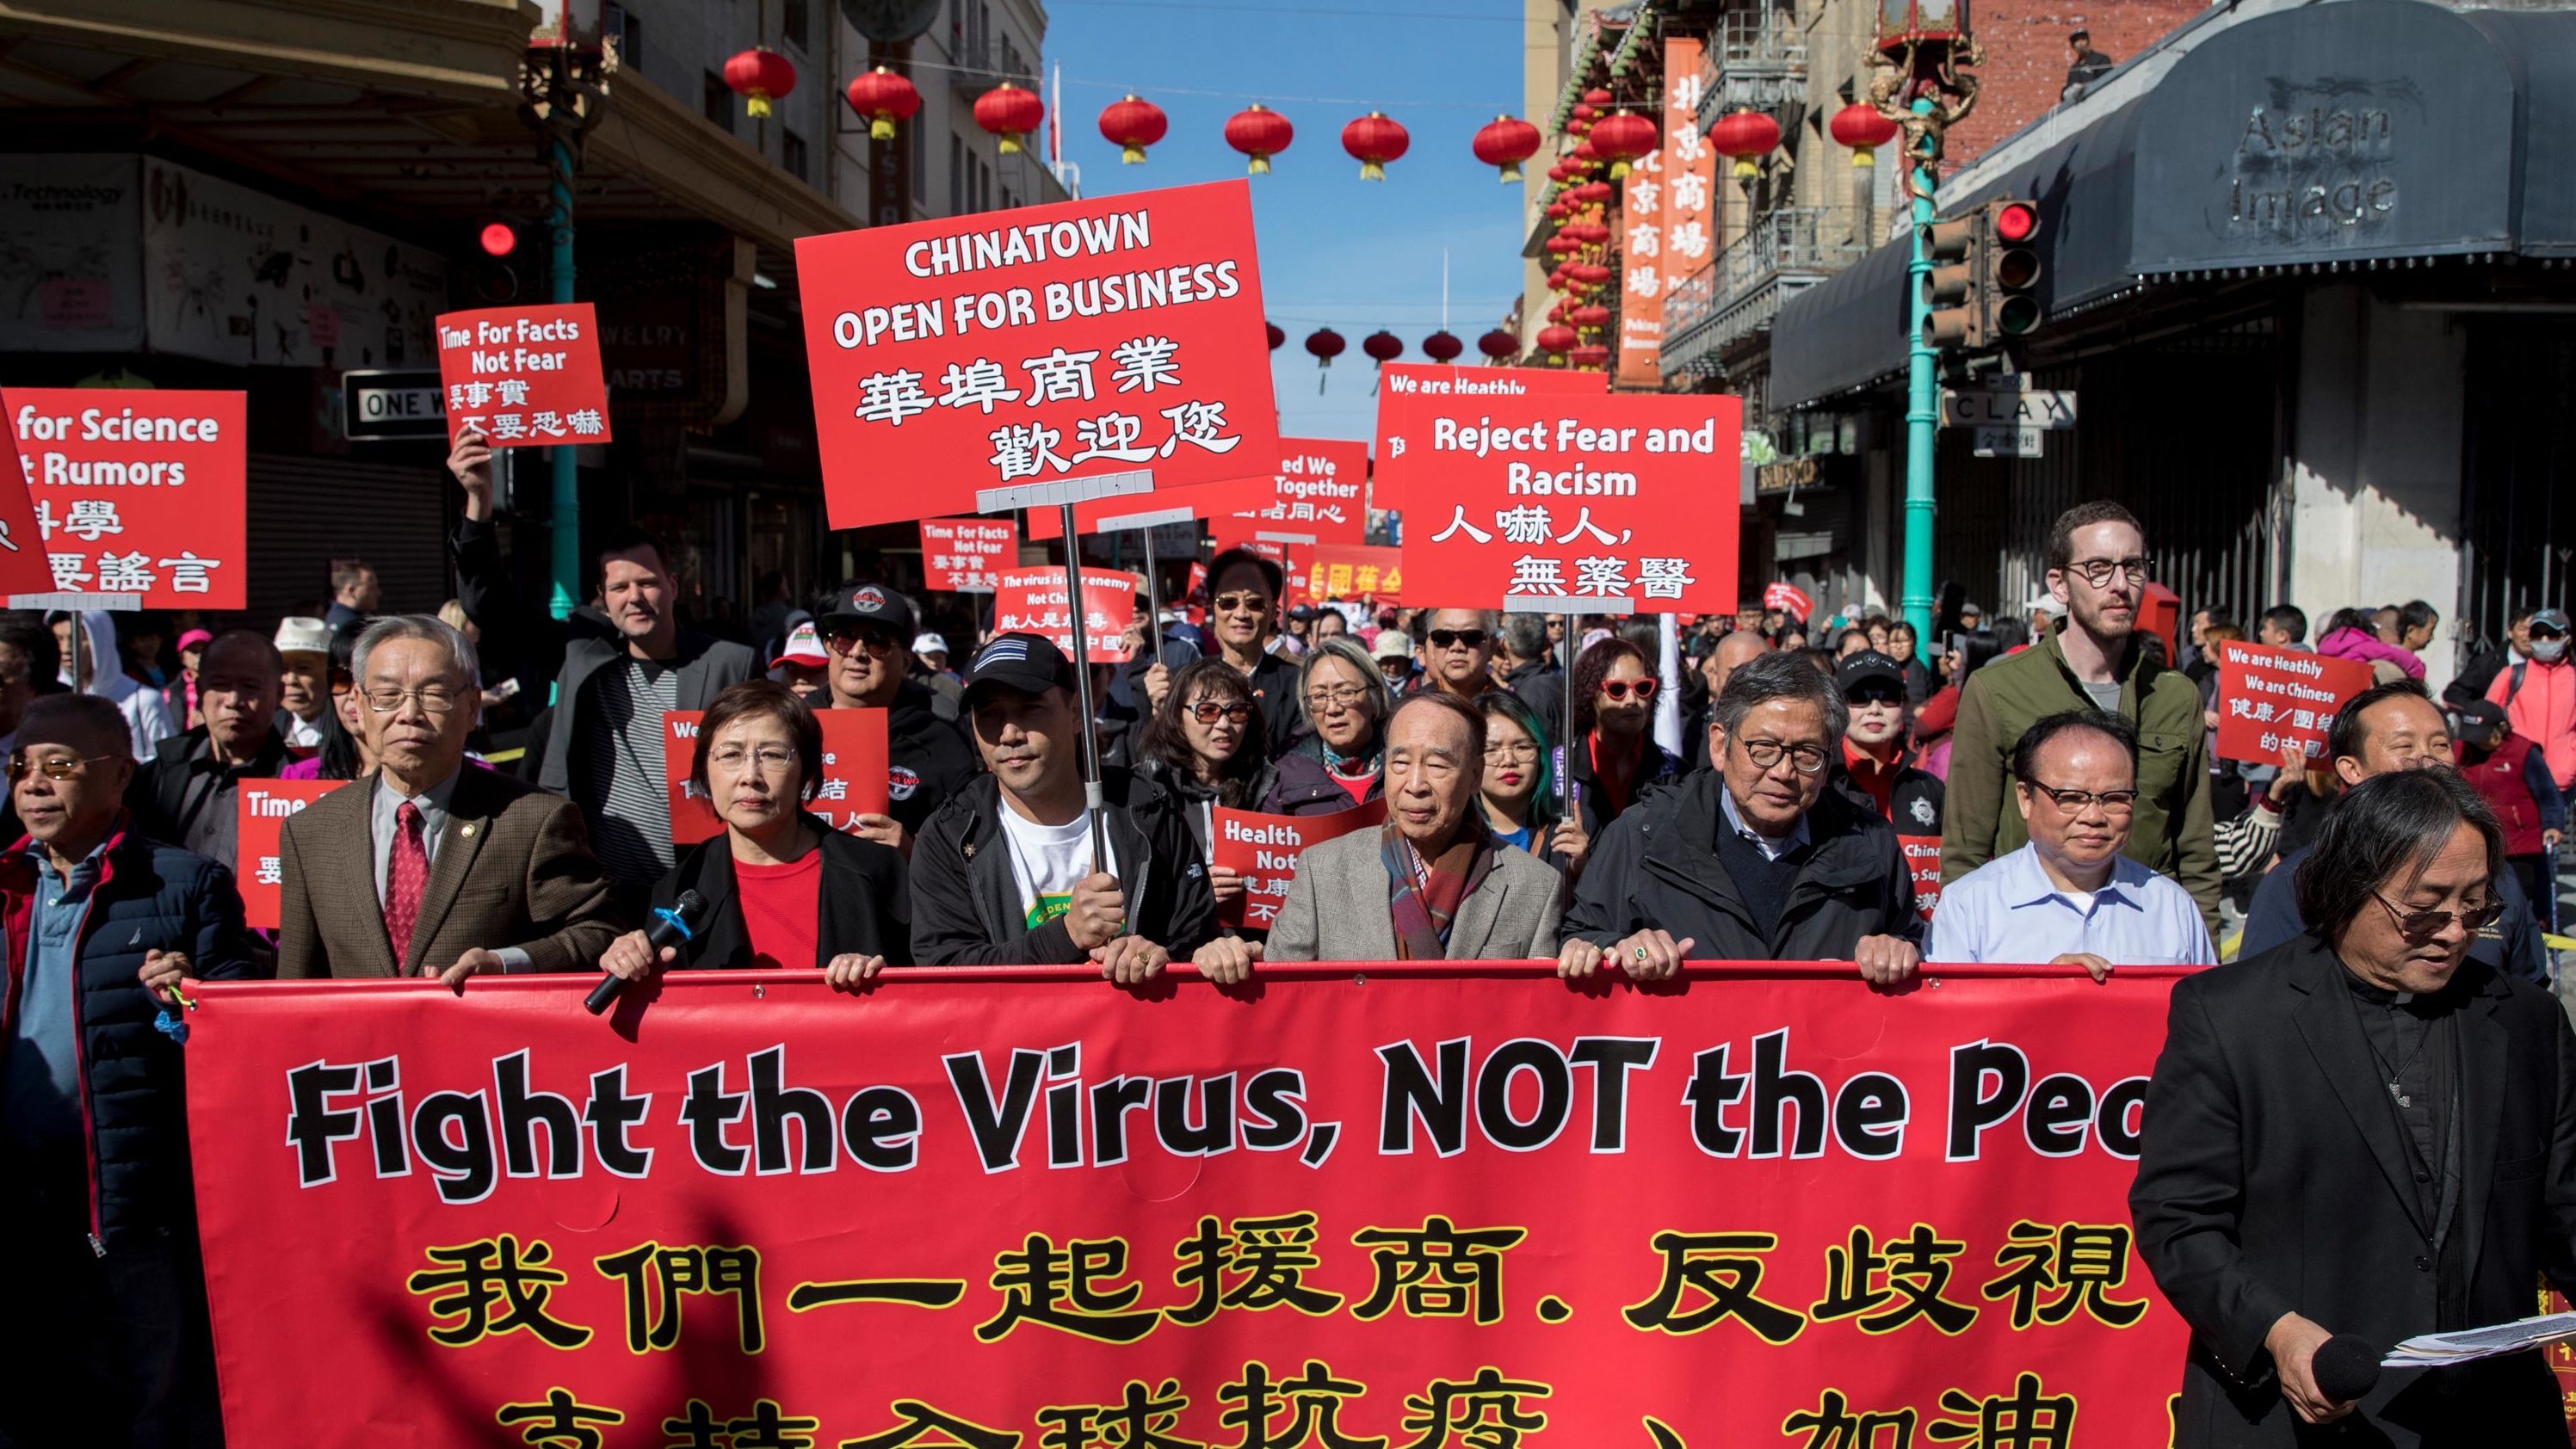 Hundreds of Chinatown residents in San Francisco take to the streets to protest against racism, on February 29, 2020.